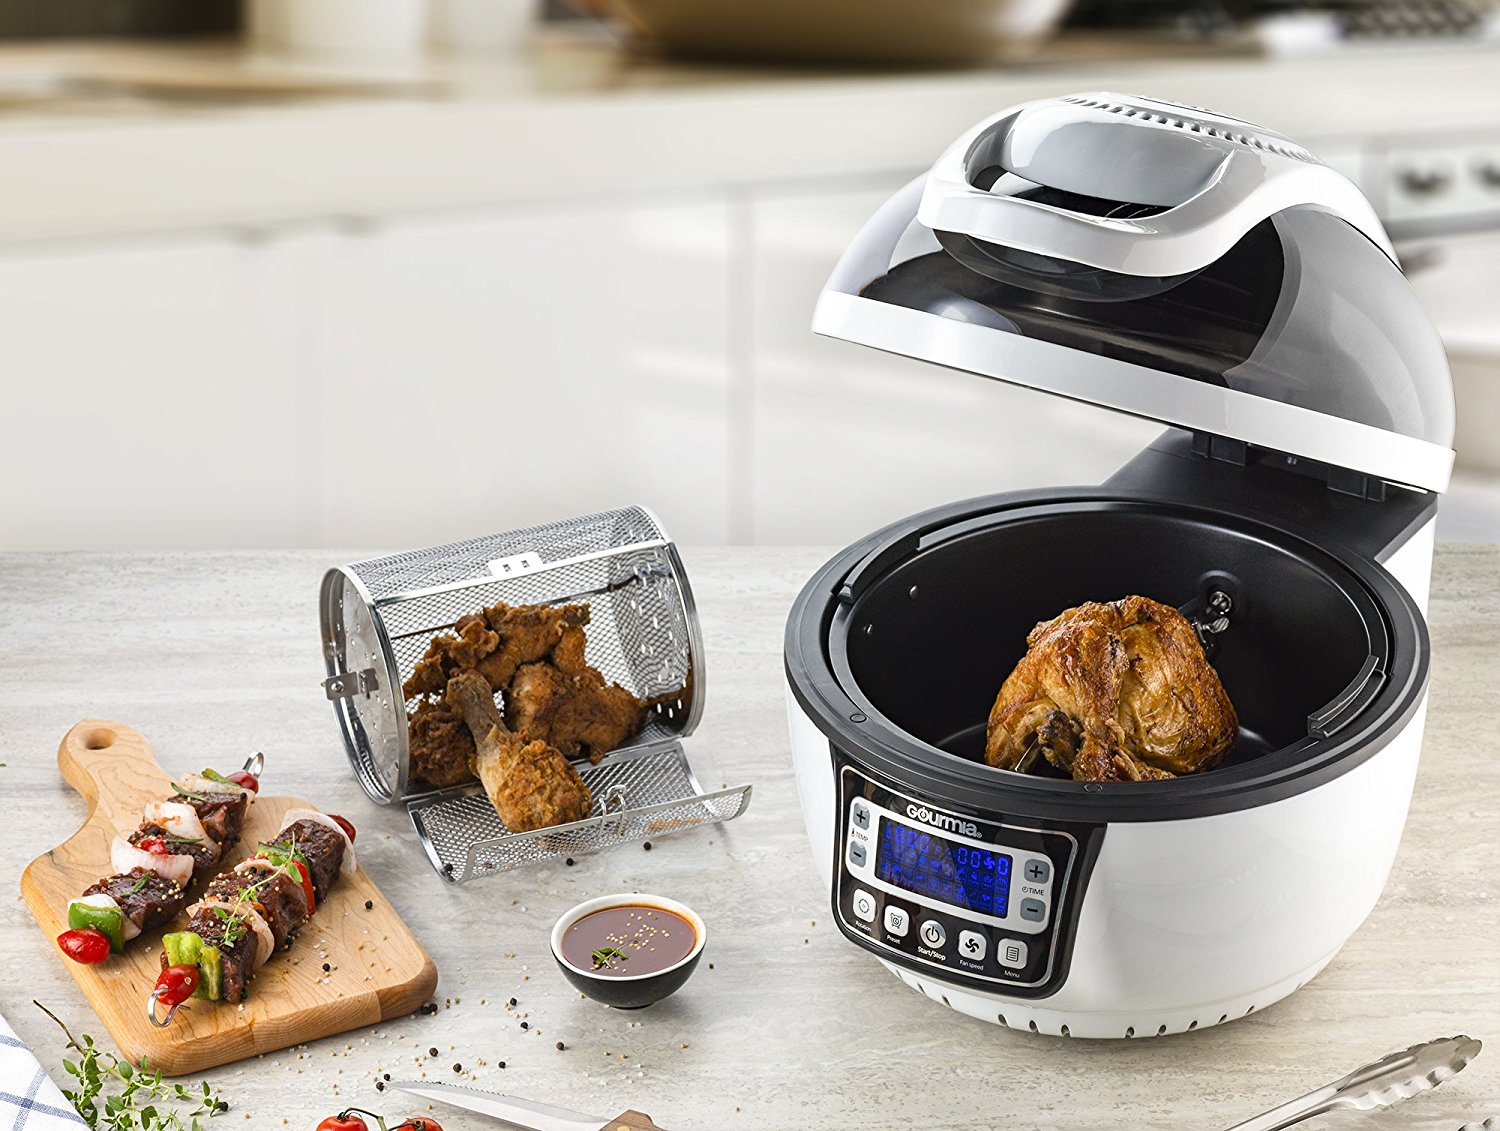 Gourmia Introduces FoodStation Indoor Grill/Air Fryer